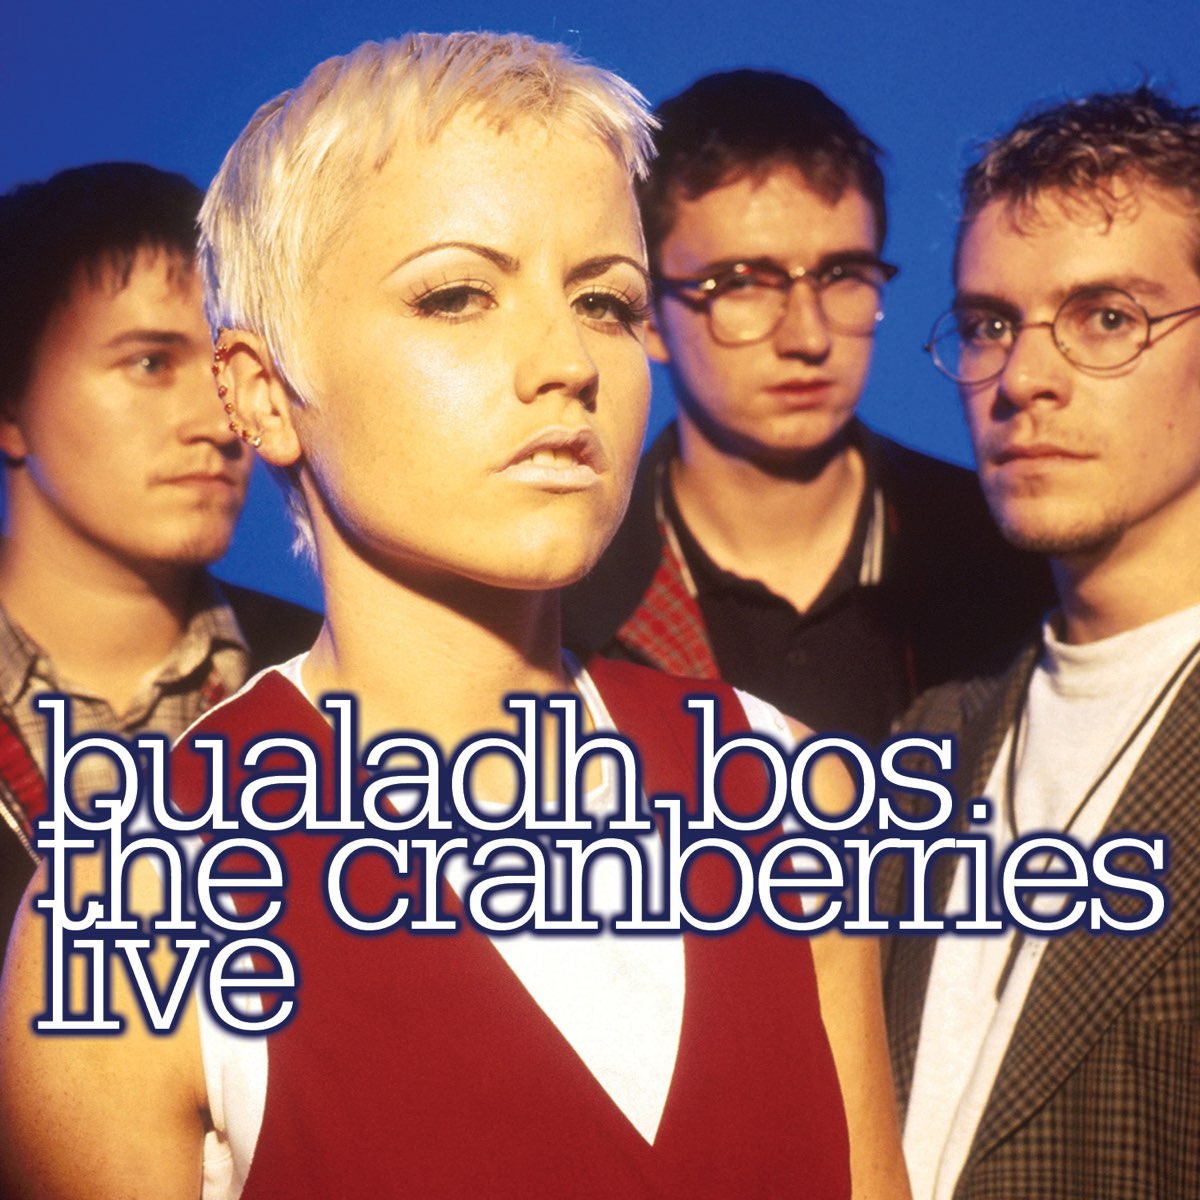 ‎Bualadh Bos: The Cranberries Live - The Cranberries的專輯 - Apple Music